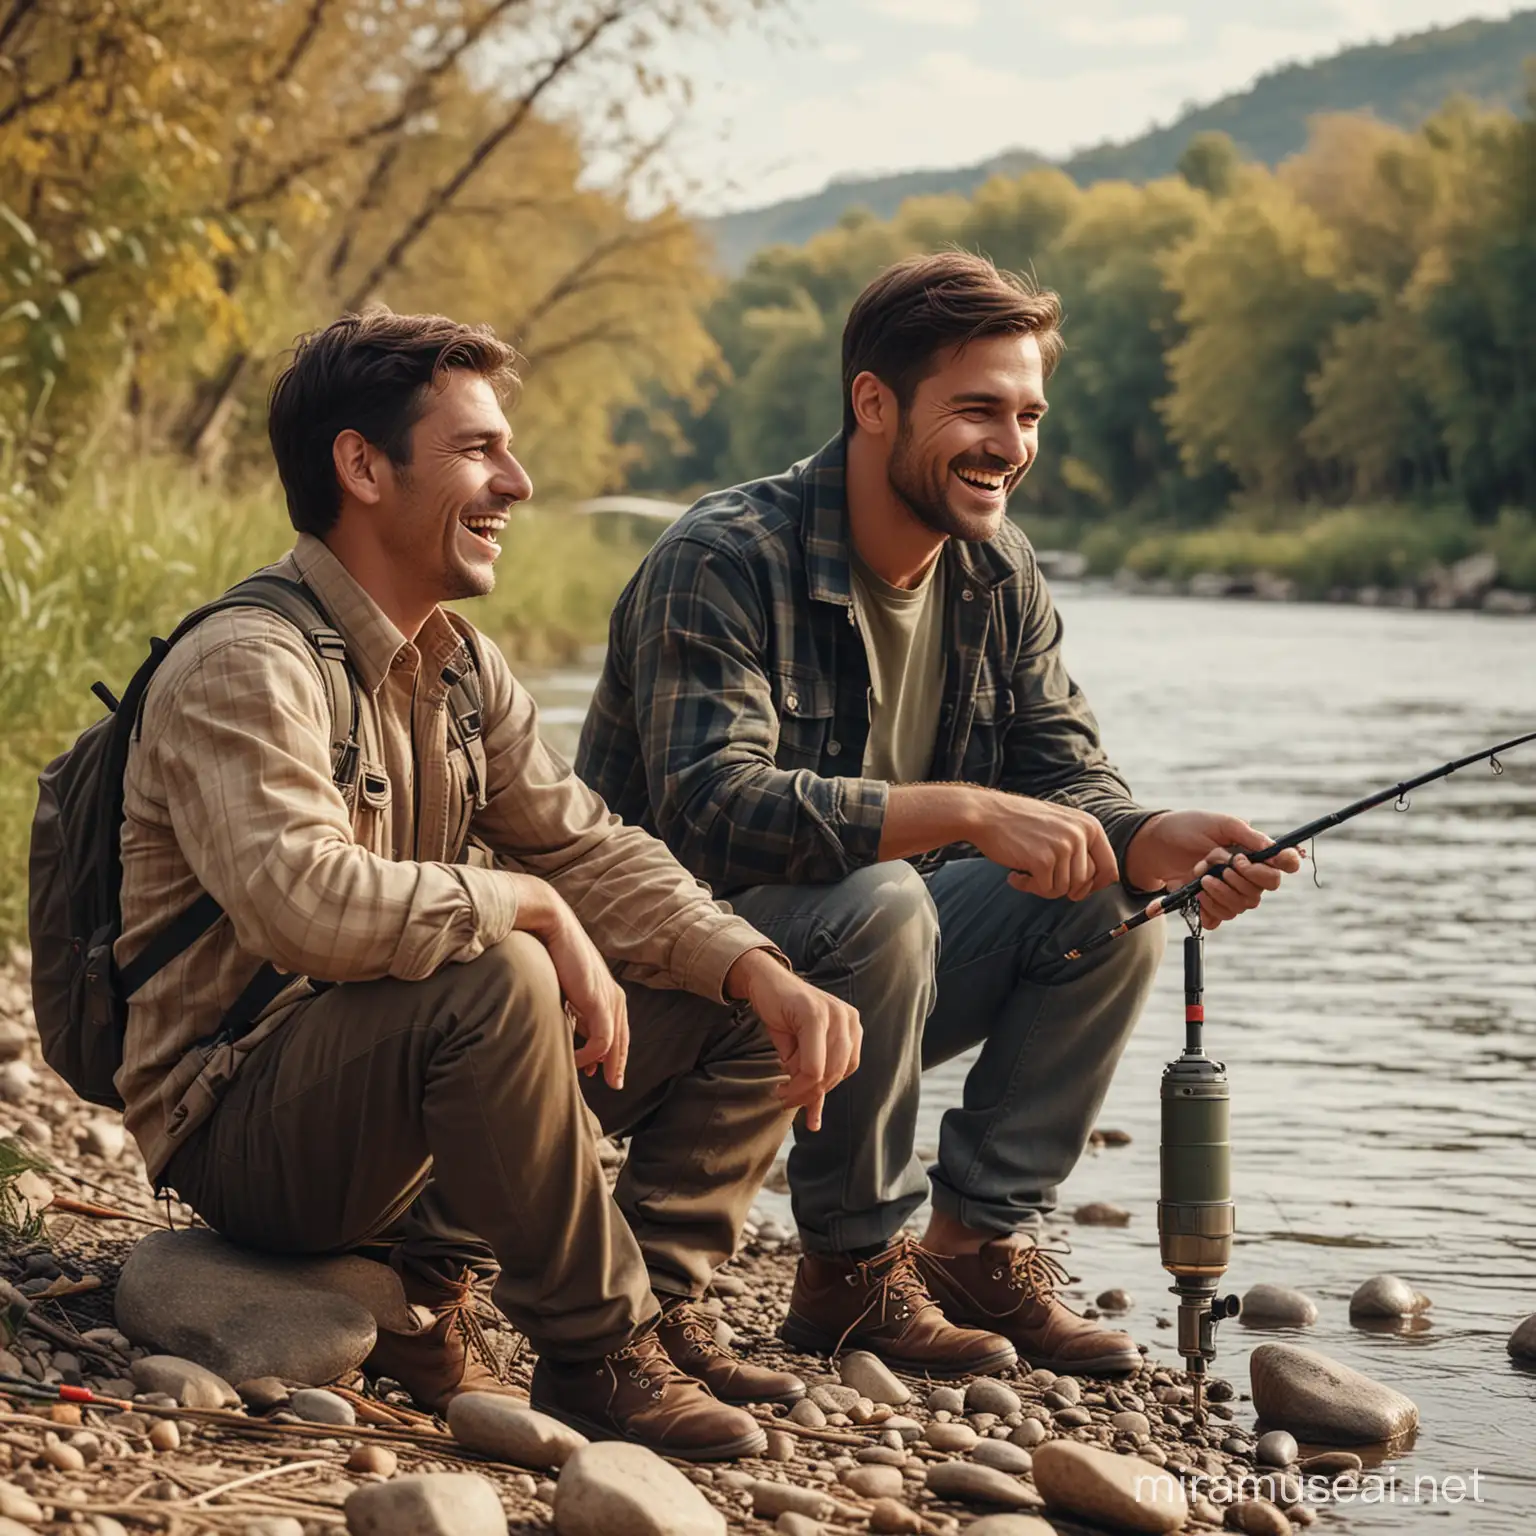 Joyful Father and Son Fishing by the Riverside HighQuality 8K